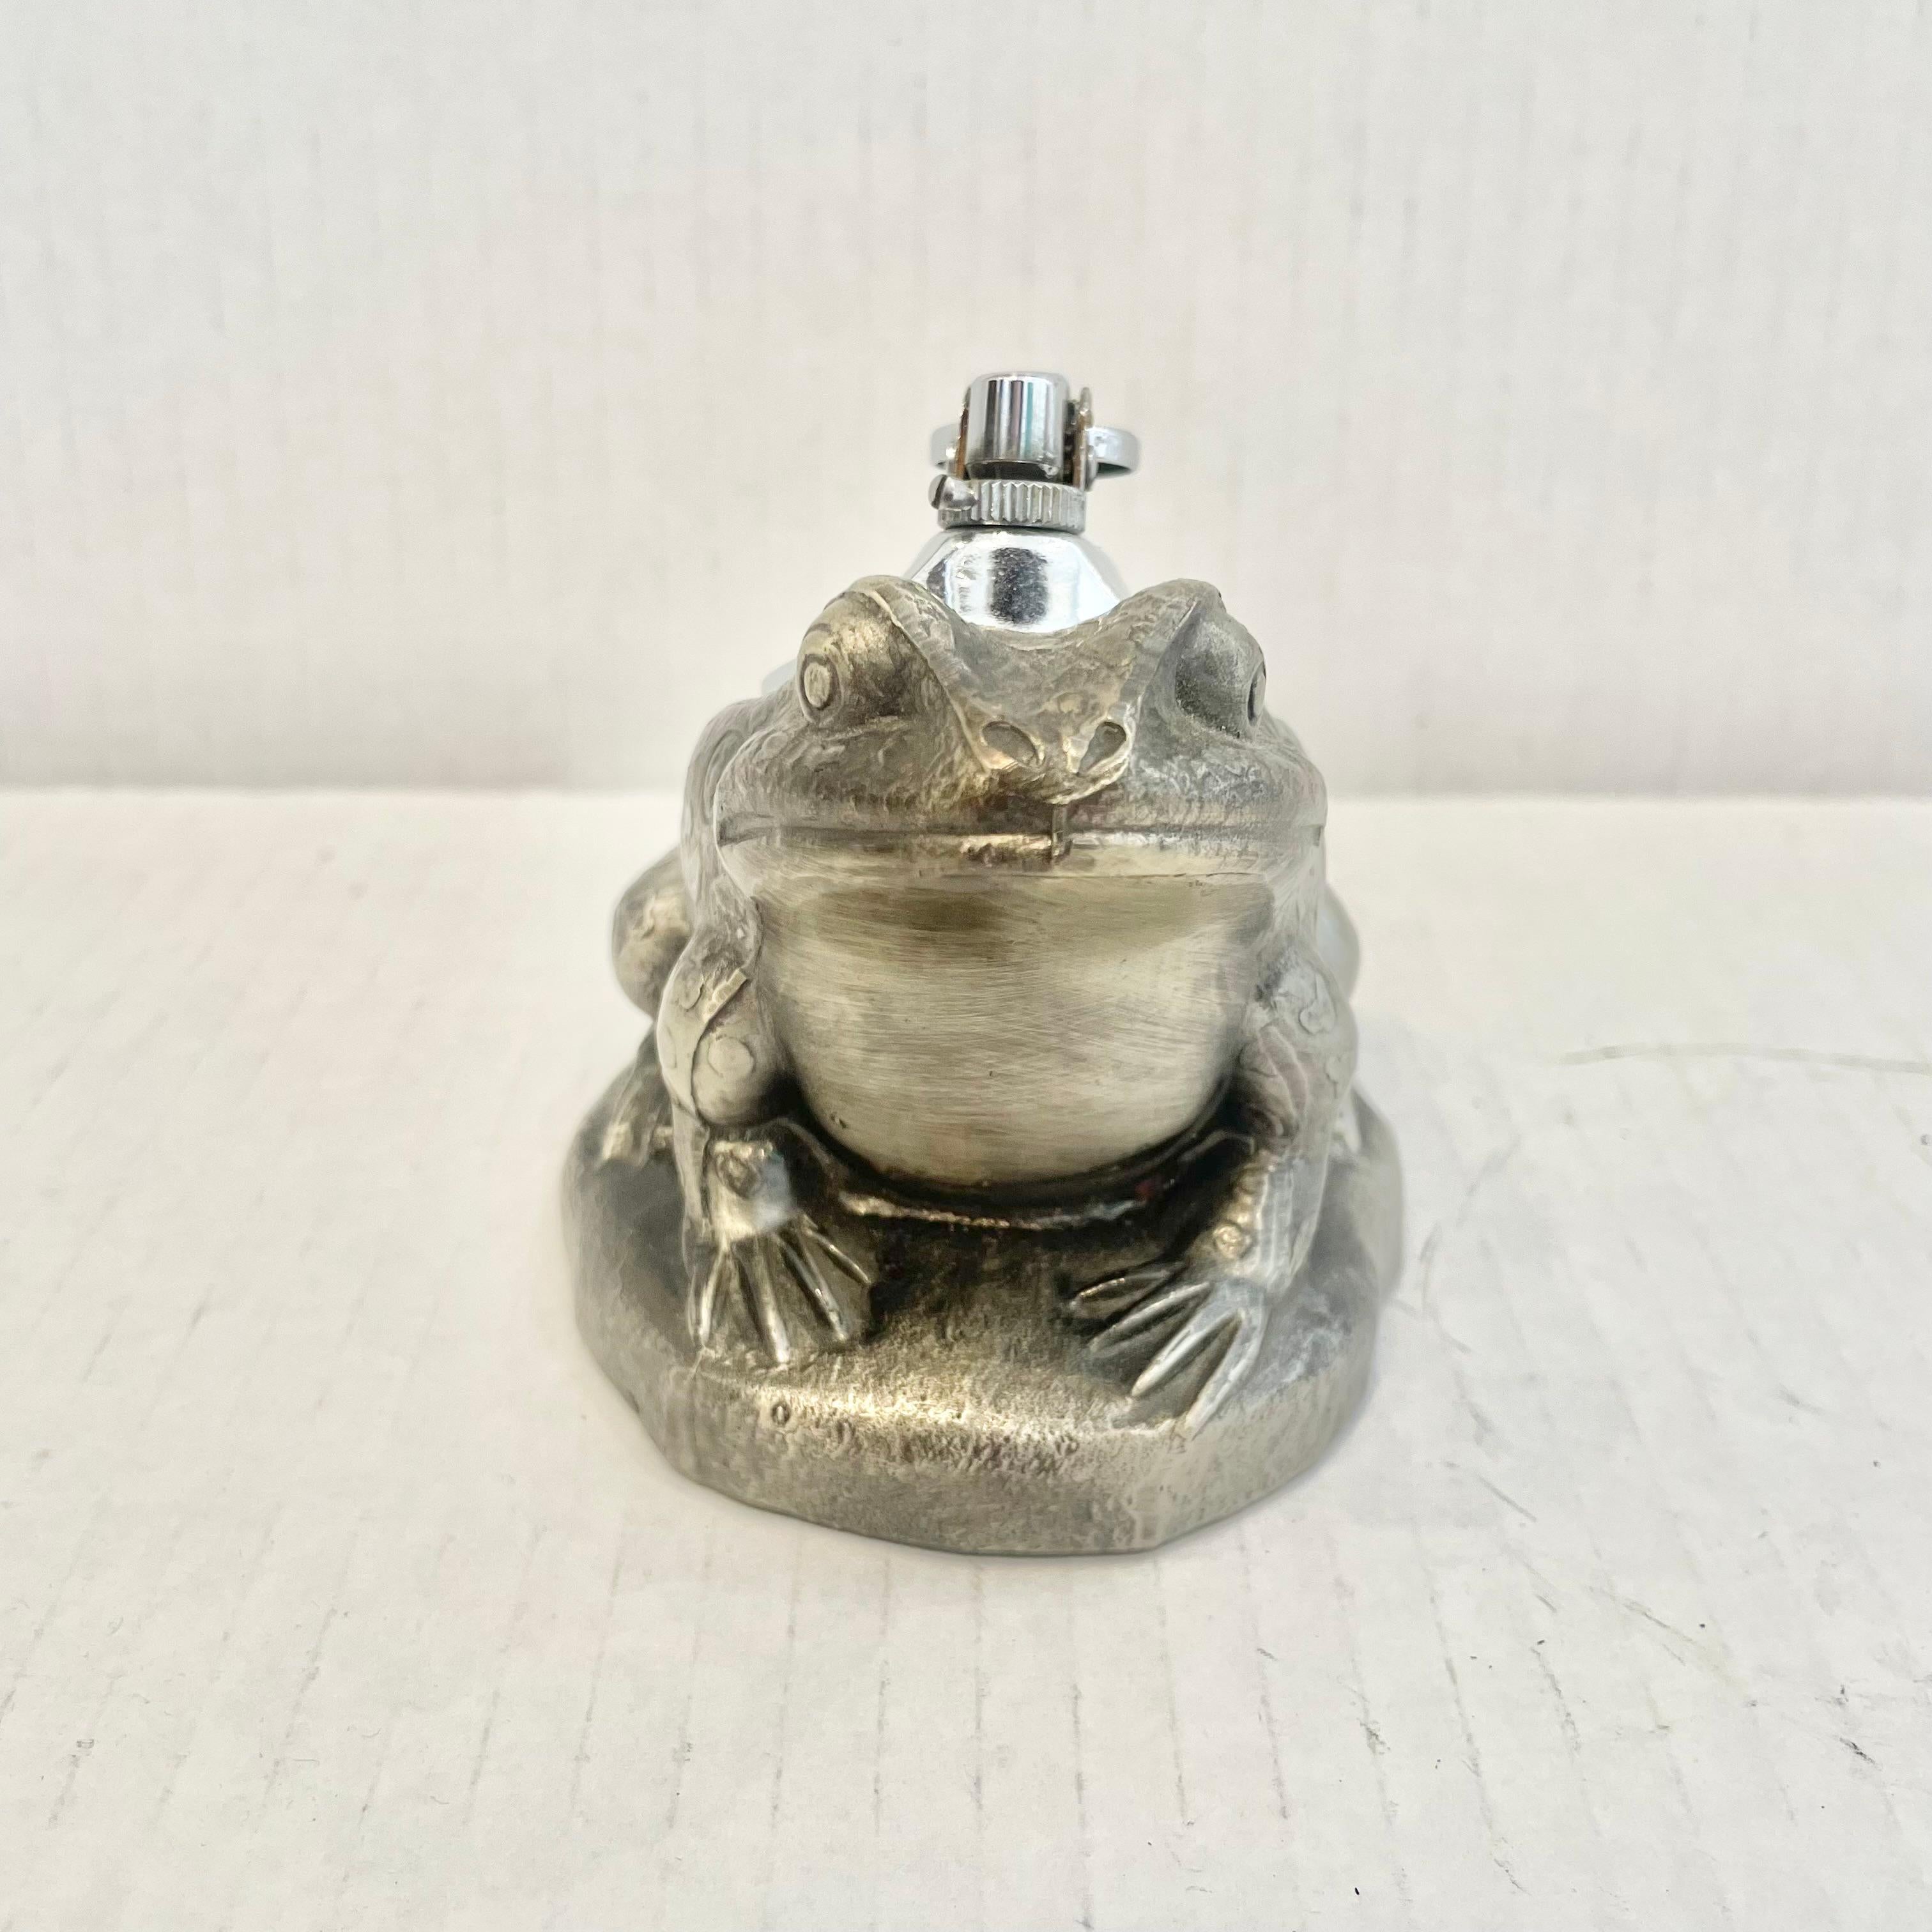 Cool vintage table lighter in the shape of a seated frog. Made completely of metal with a hollow body. Beautiful silver color with details like small spots all over the frogs bogs. Cool tobacco accessory and conversation piece. Working lighter. Very